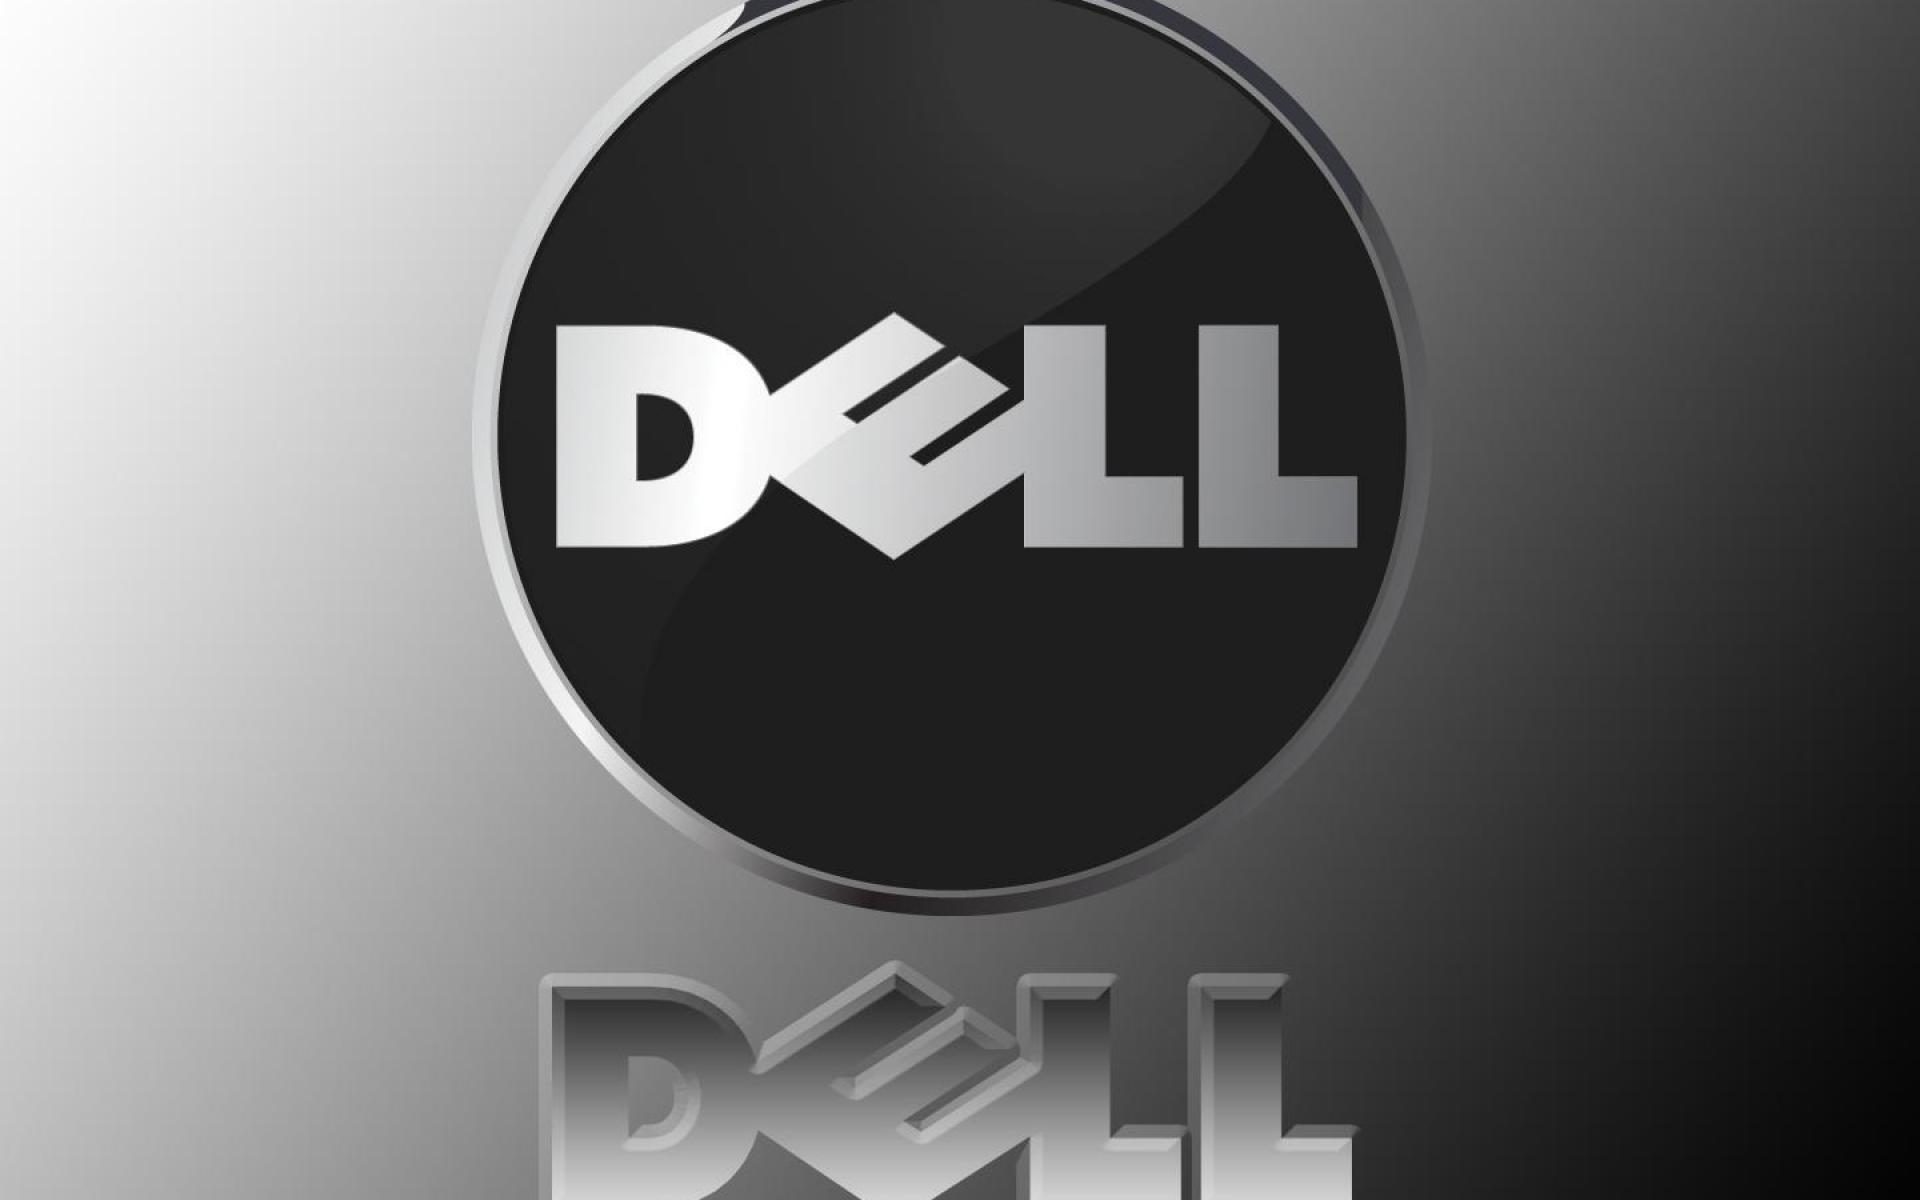 20 Wallpapers for Dell Laptops ideas  hd wallpapers for laptop dell  laptops laptop wallpaper